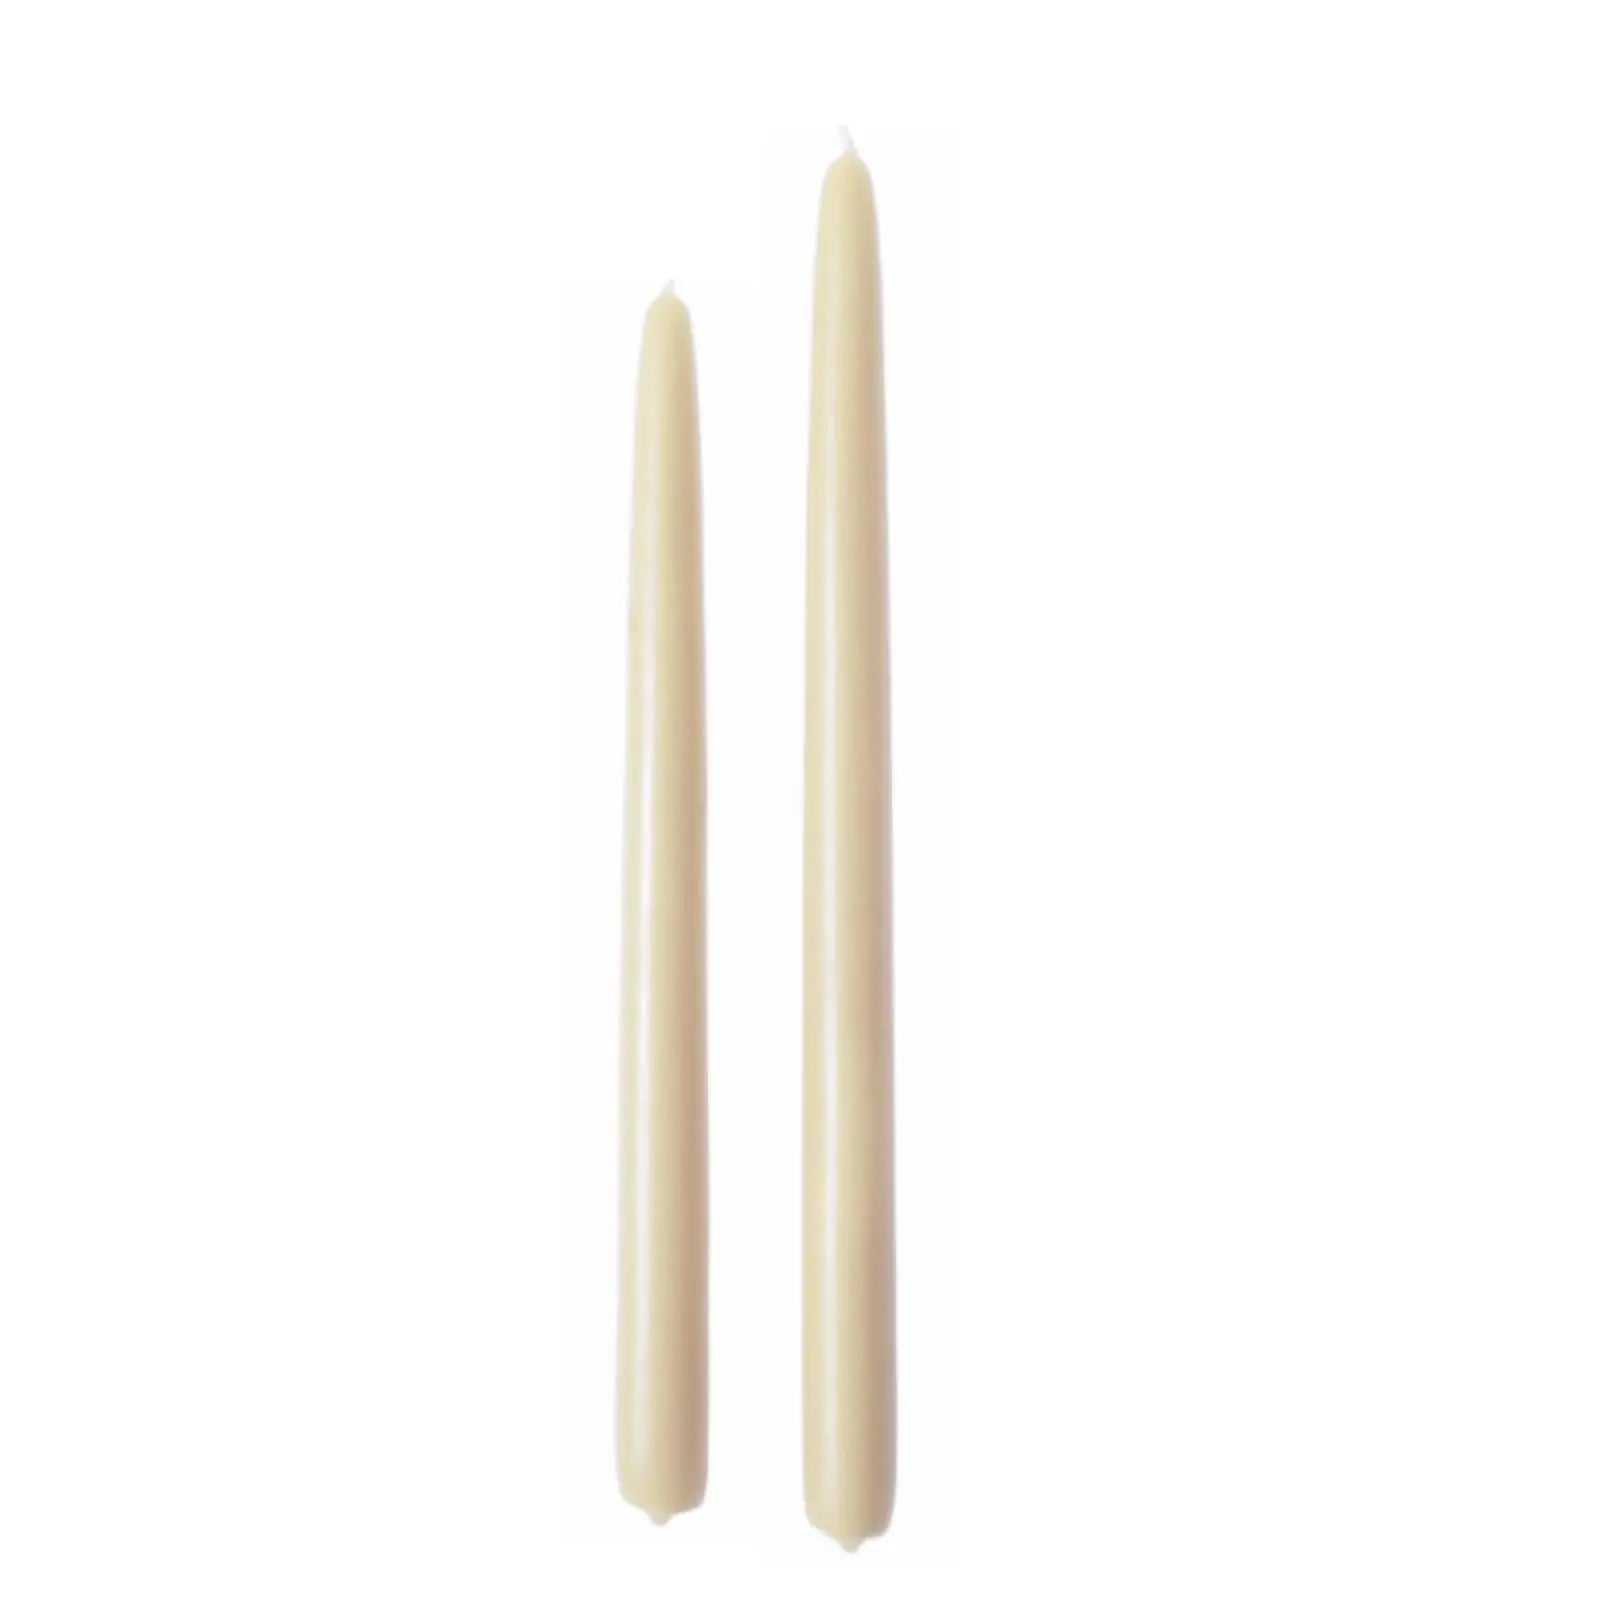 Ivory Beeswax Tapers - Home Smith